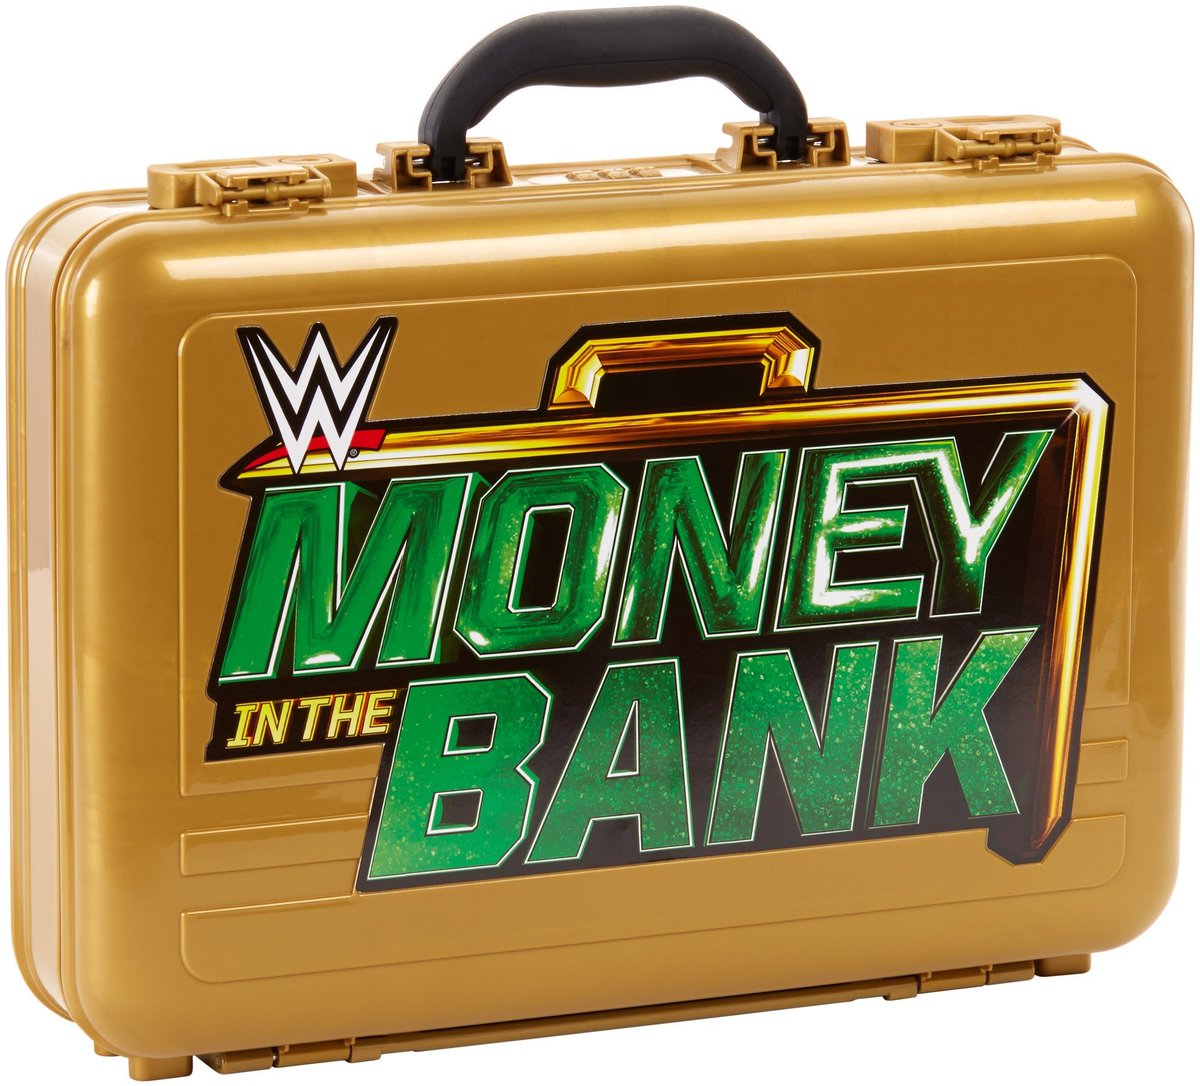 I want this briefcase back for Money in the Bank this year.